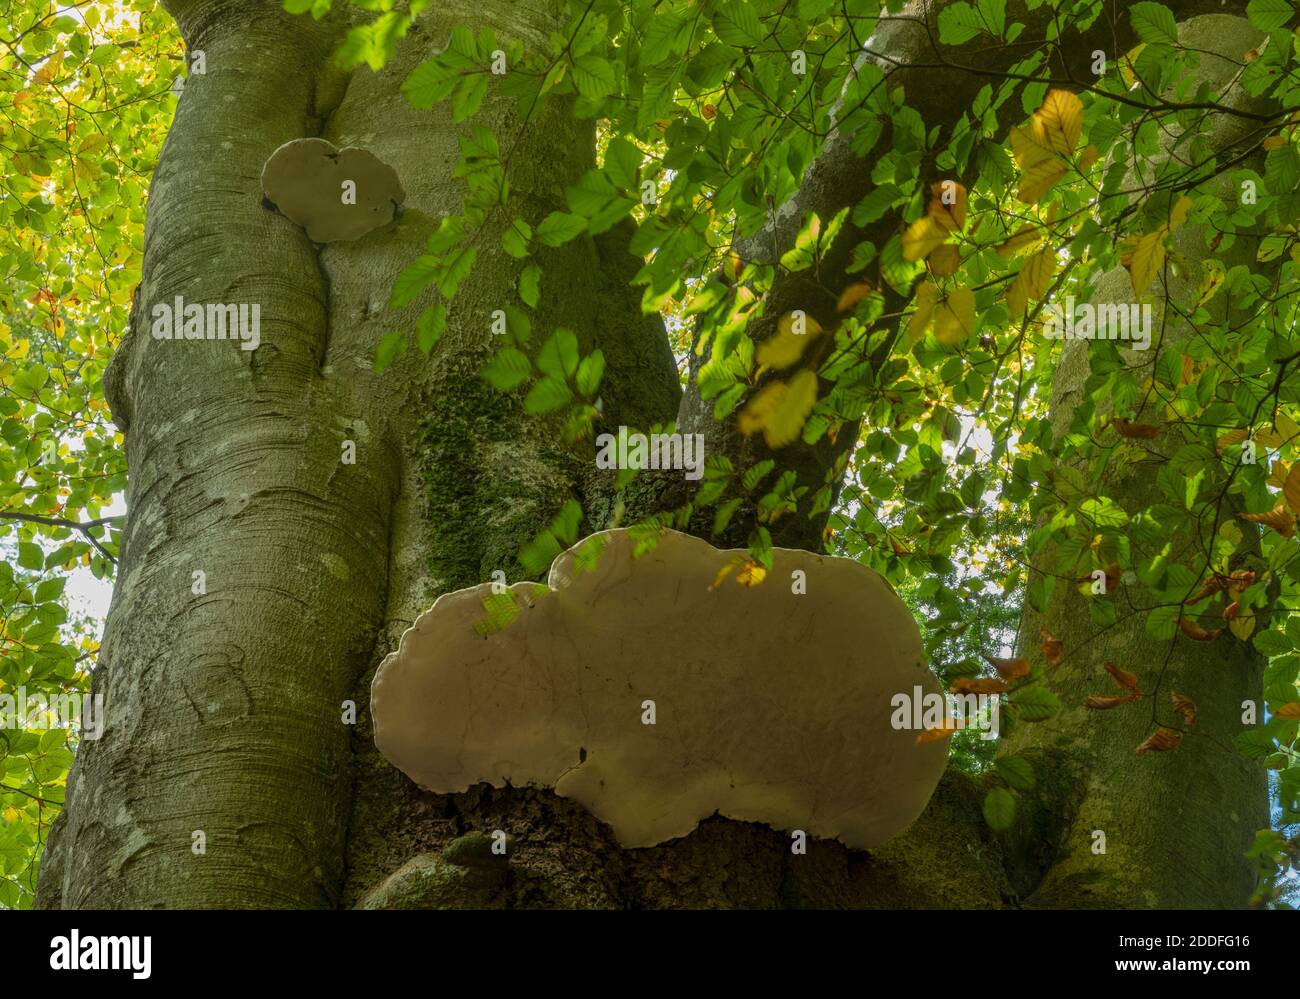 Southern Bracket, Ganoderma australe, growing on old beech tree, New Forest. Stock Photo